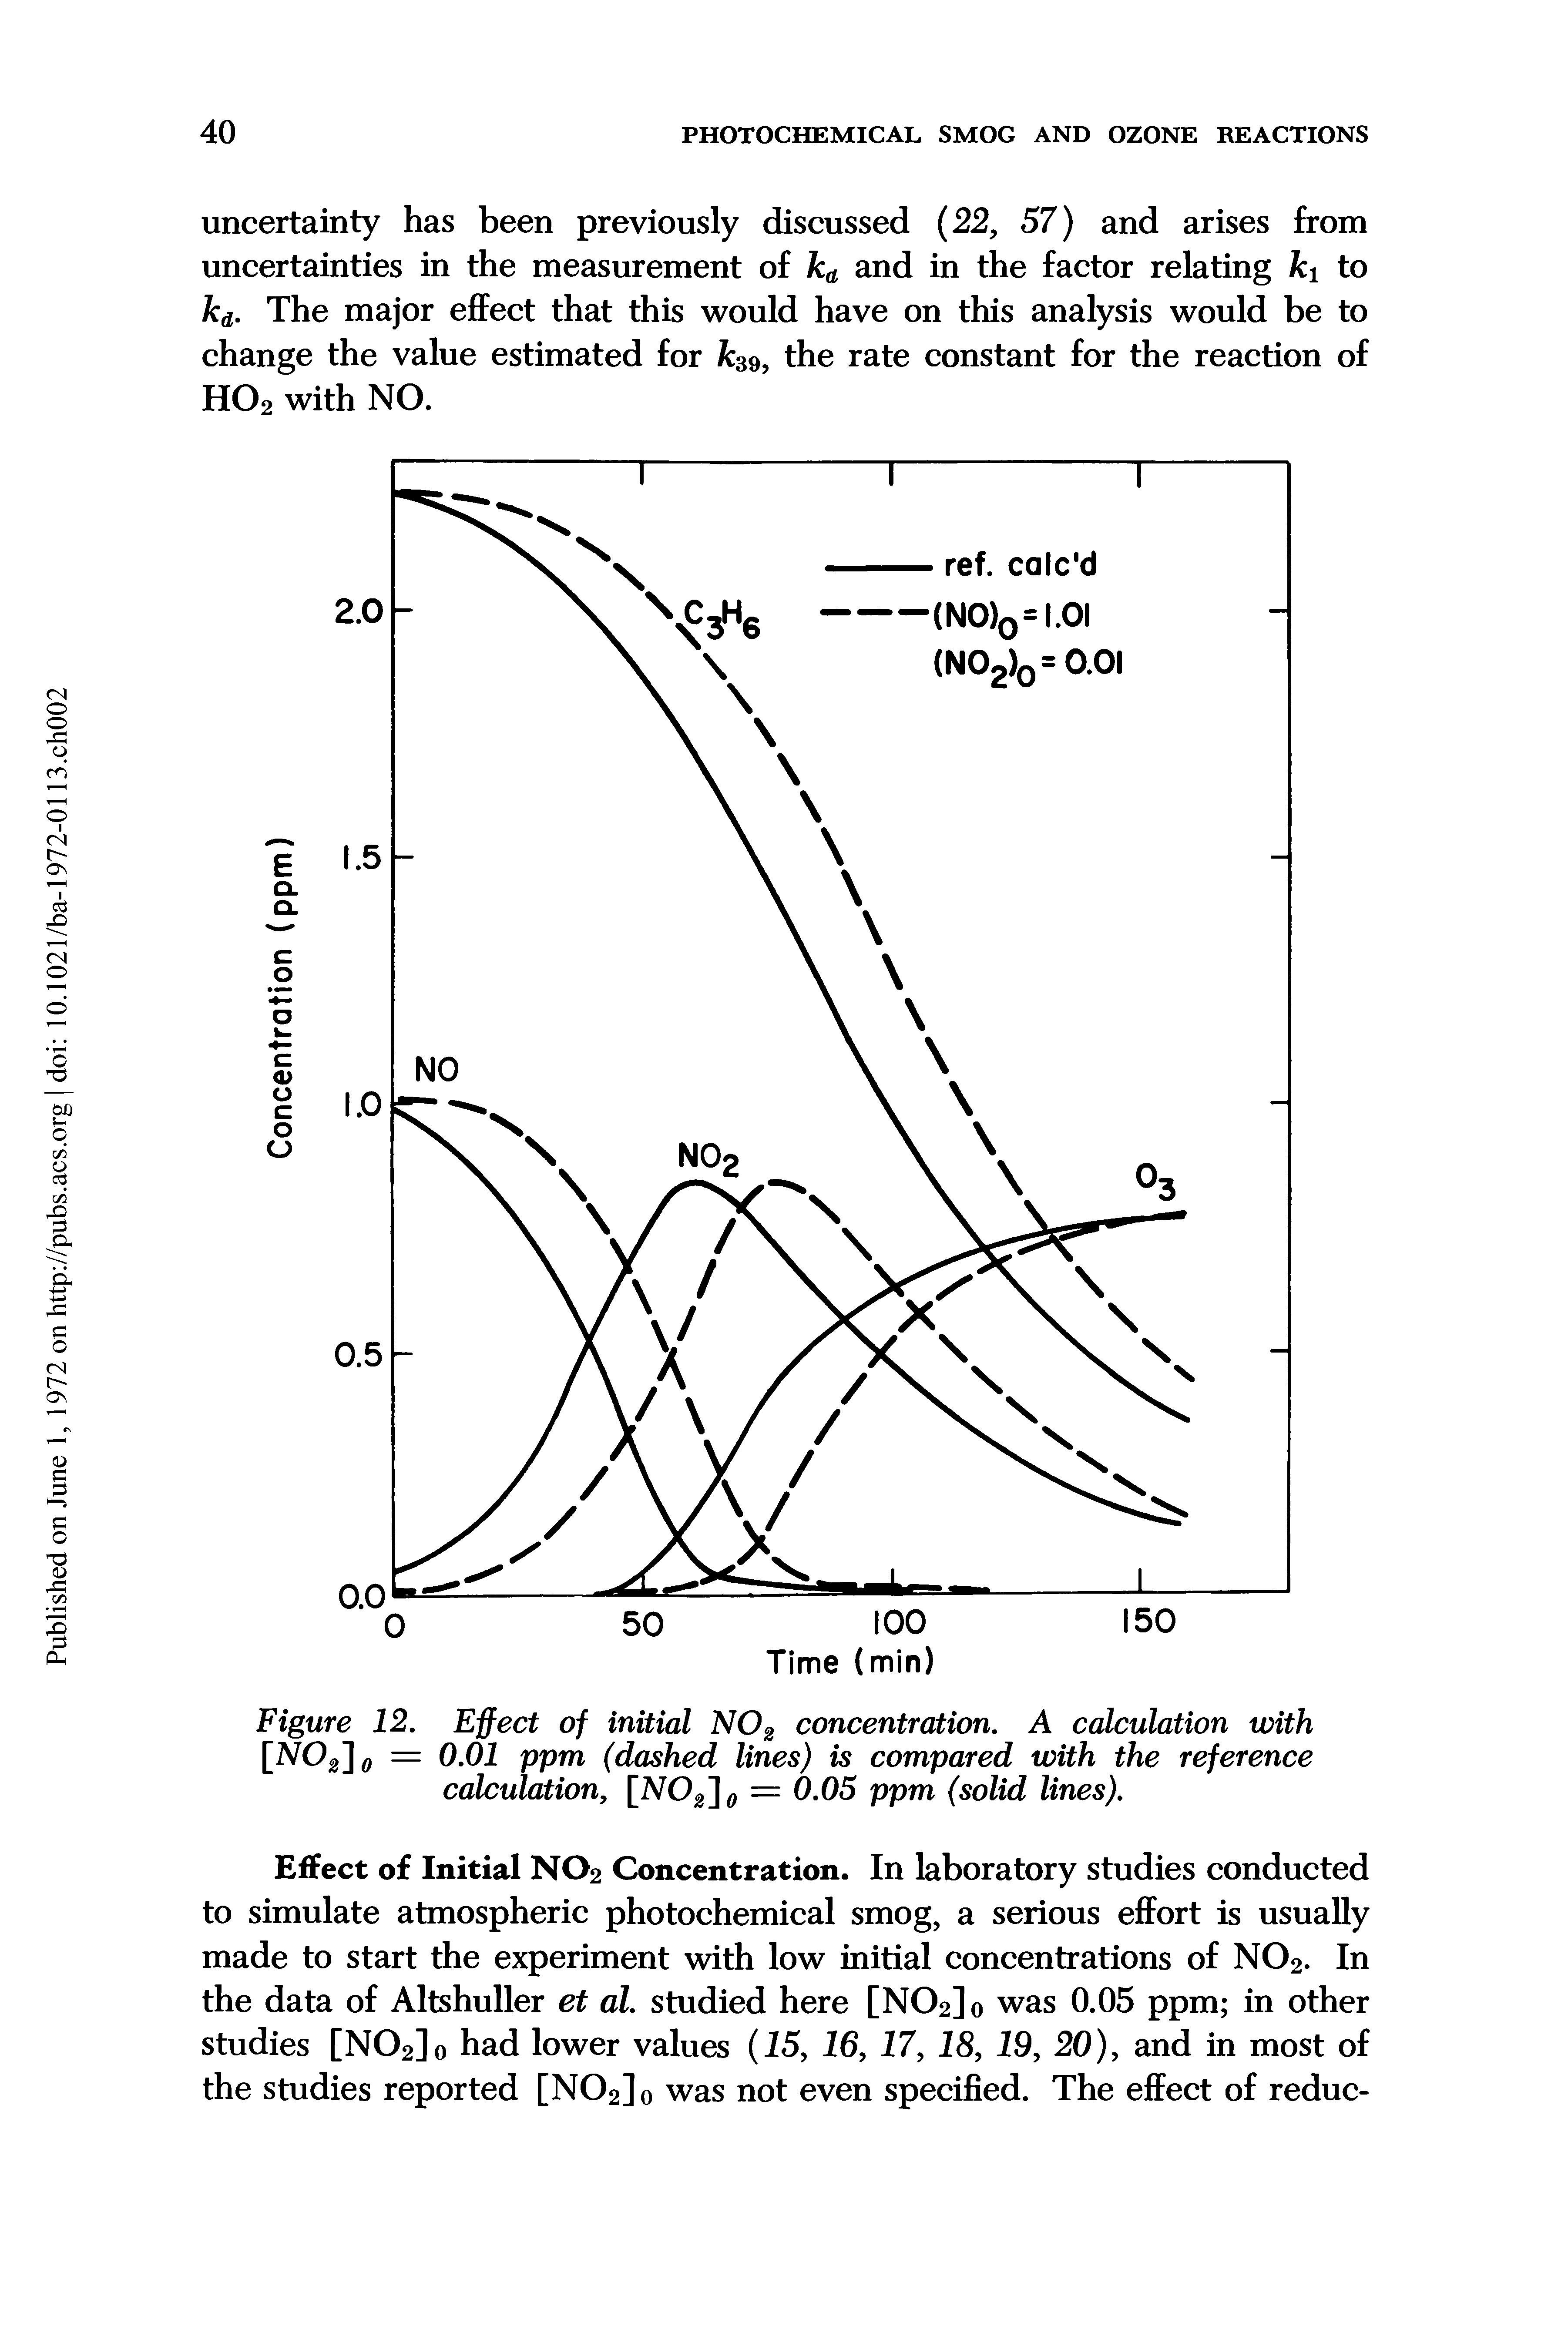 Figure 12. Effect of initial NO2 concentration. A calculation with [NOg] = 0.01 ppm (dashed lines) is compared with the reference calculation, [NOg] = 0.05 ppm (solid lines).